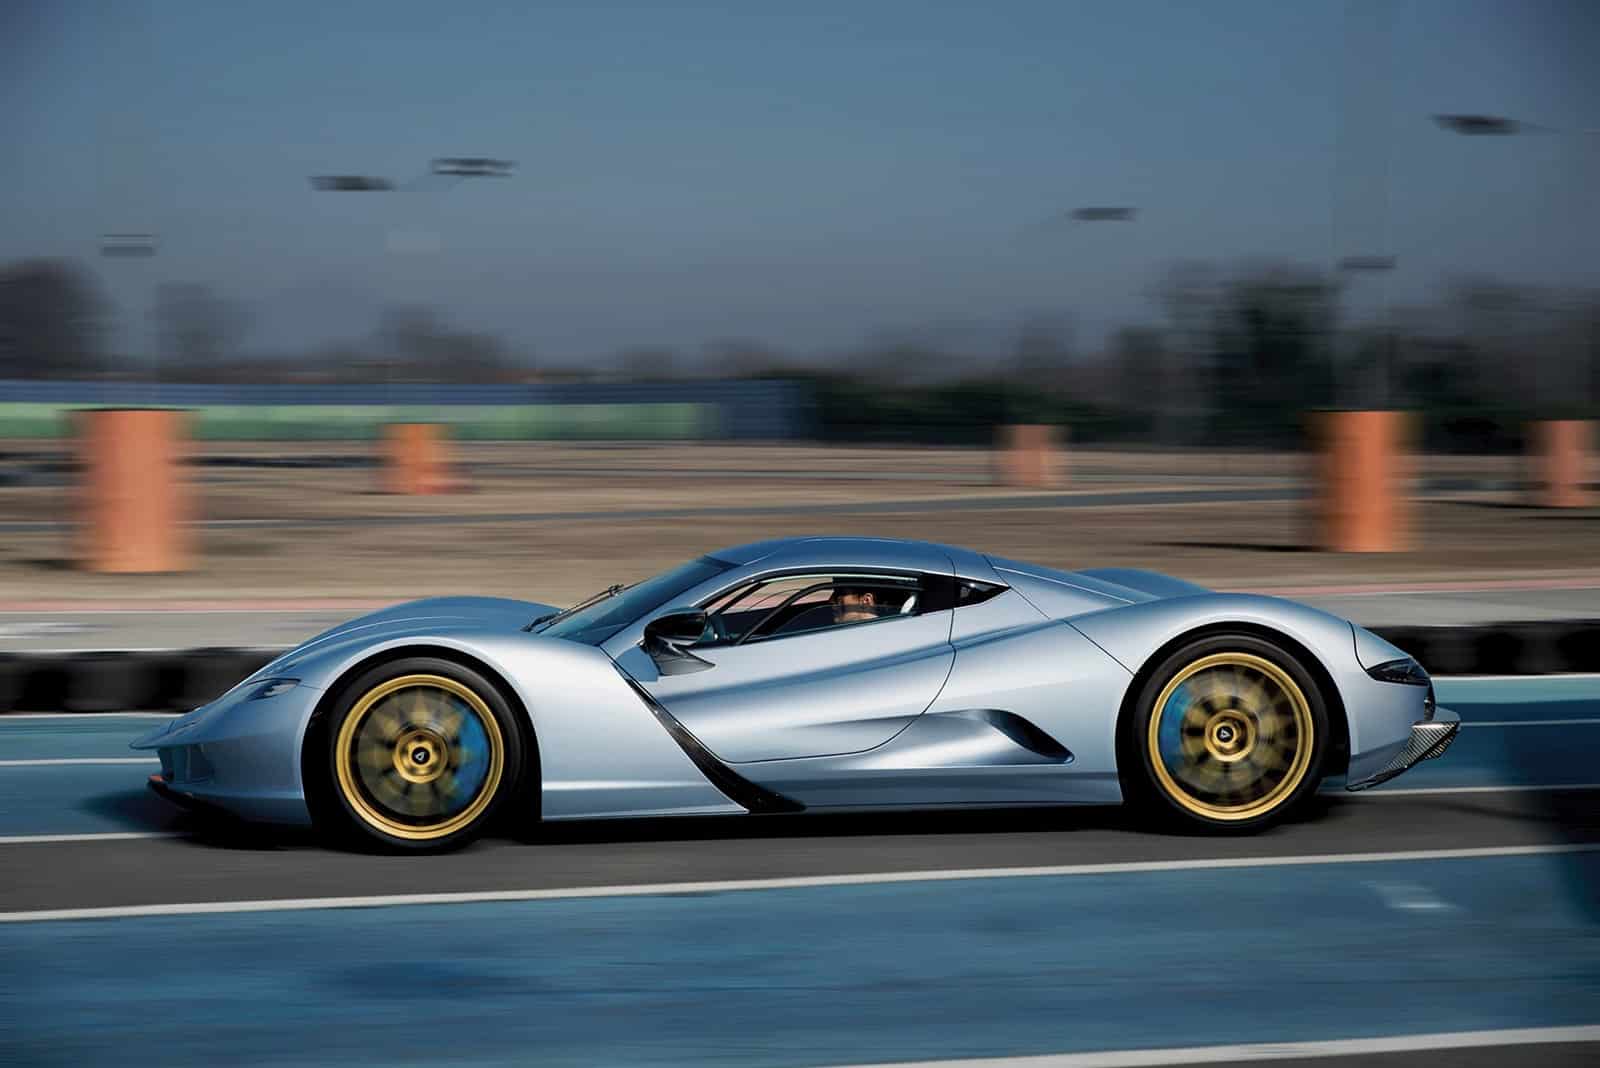 0 to 100 km / h in 1.73 seconds and 1,441 euros the CV